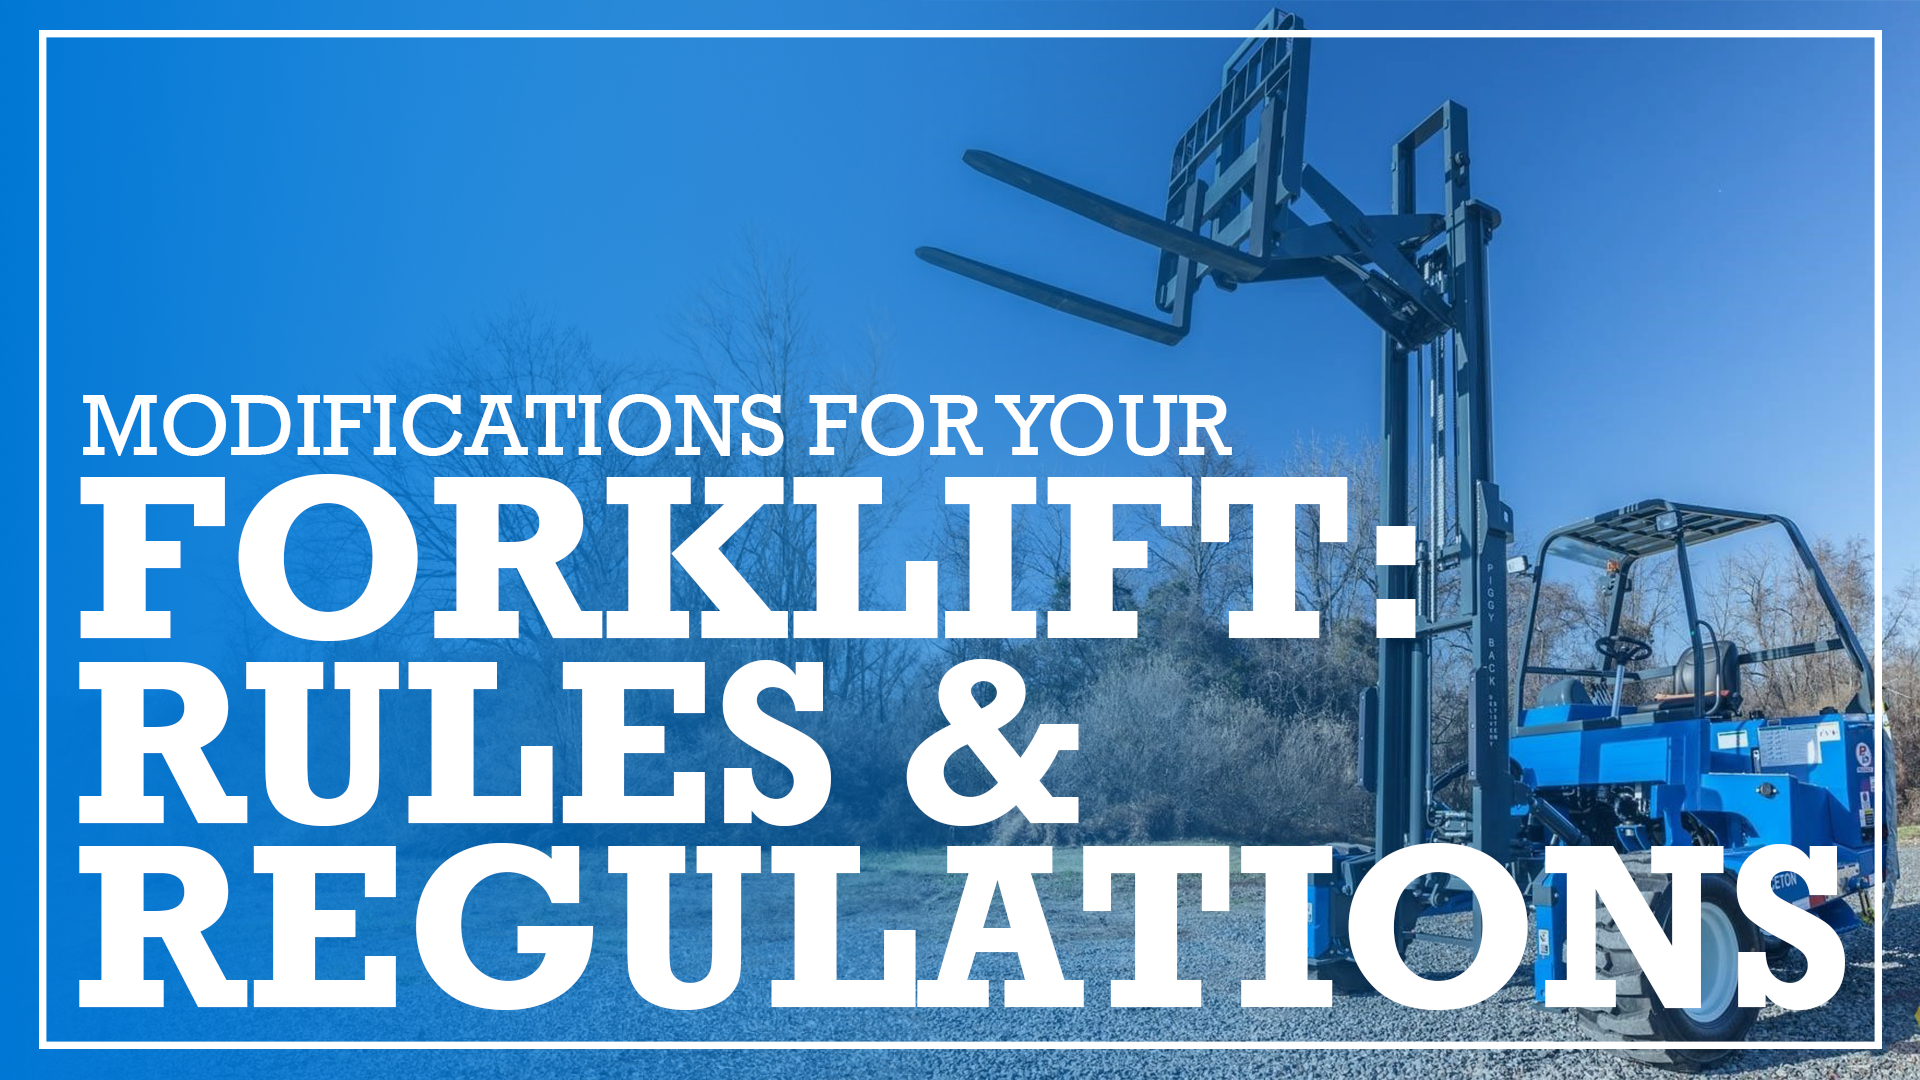 Modifications for Your Forklift Rules and Regulations